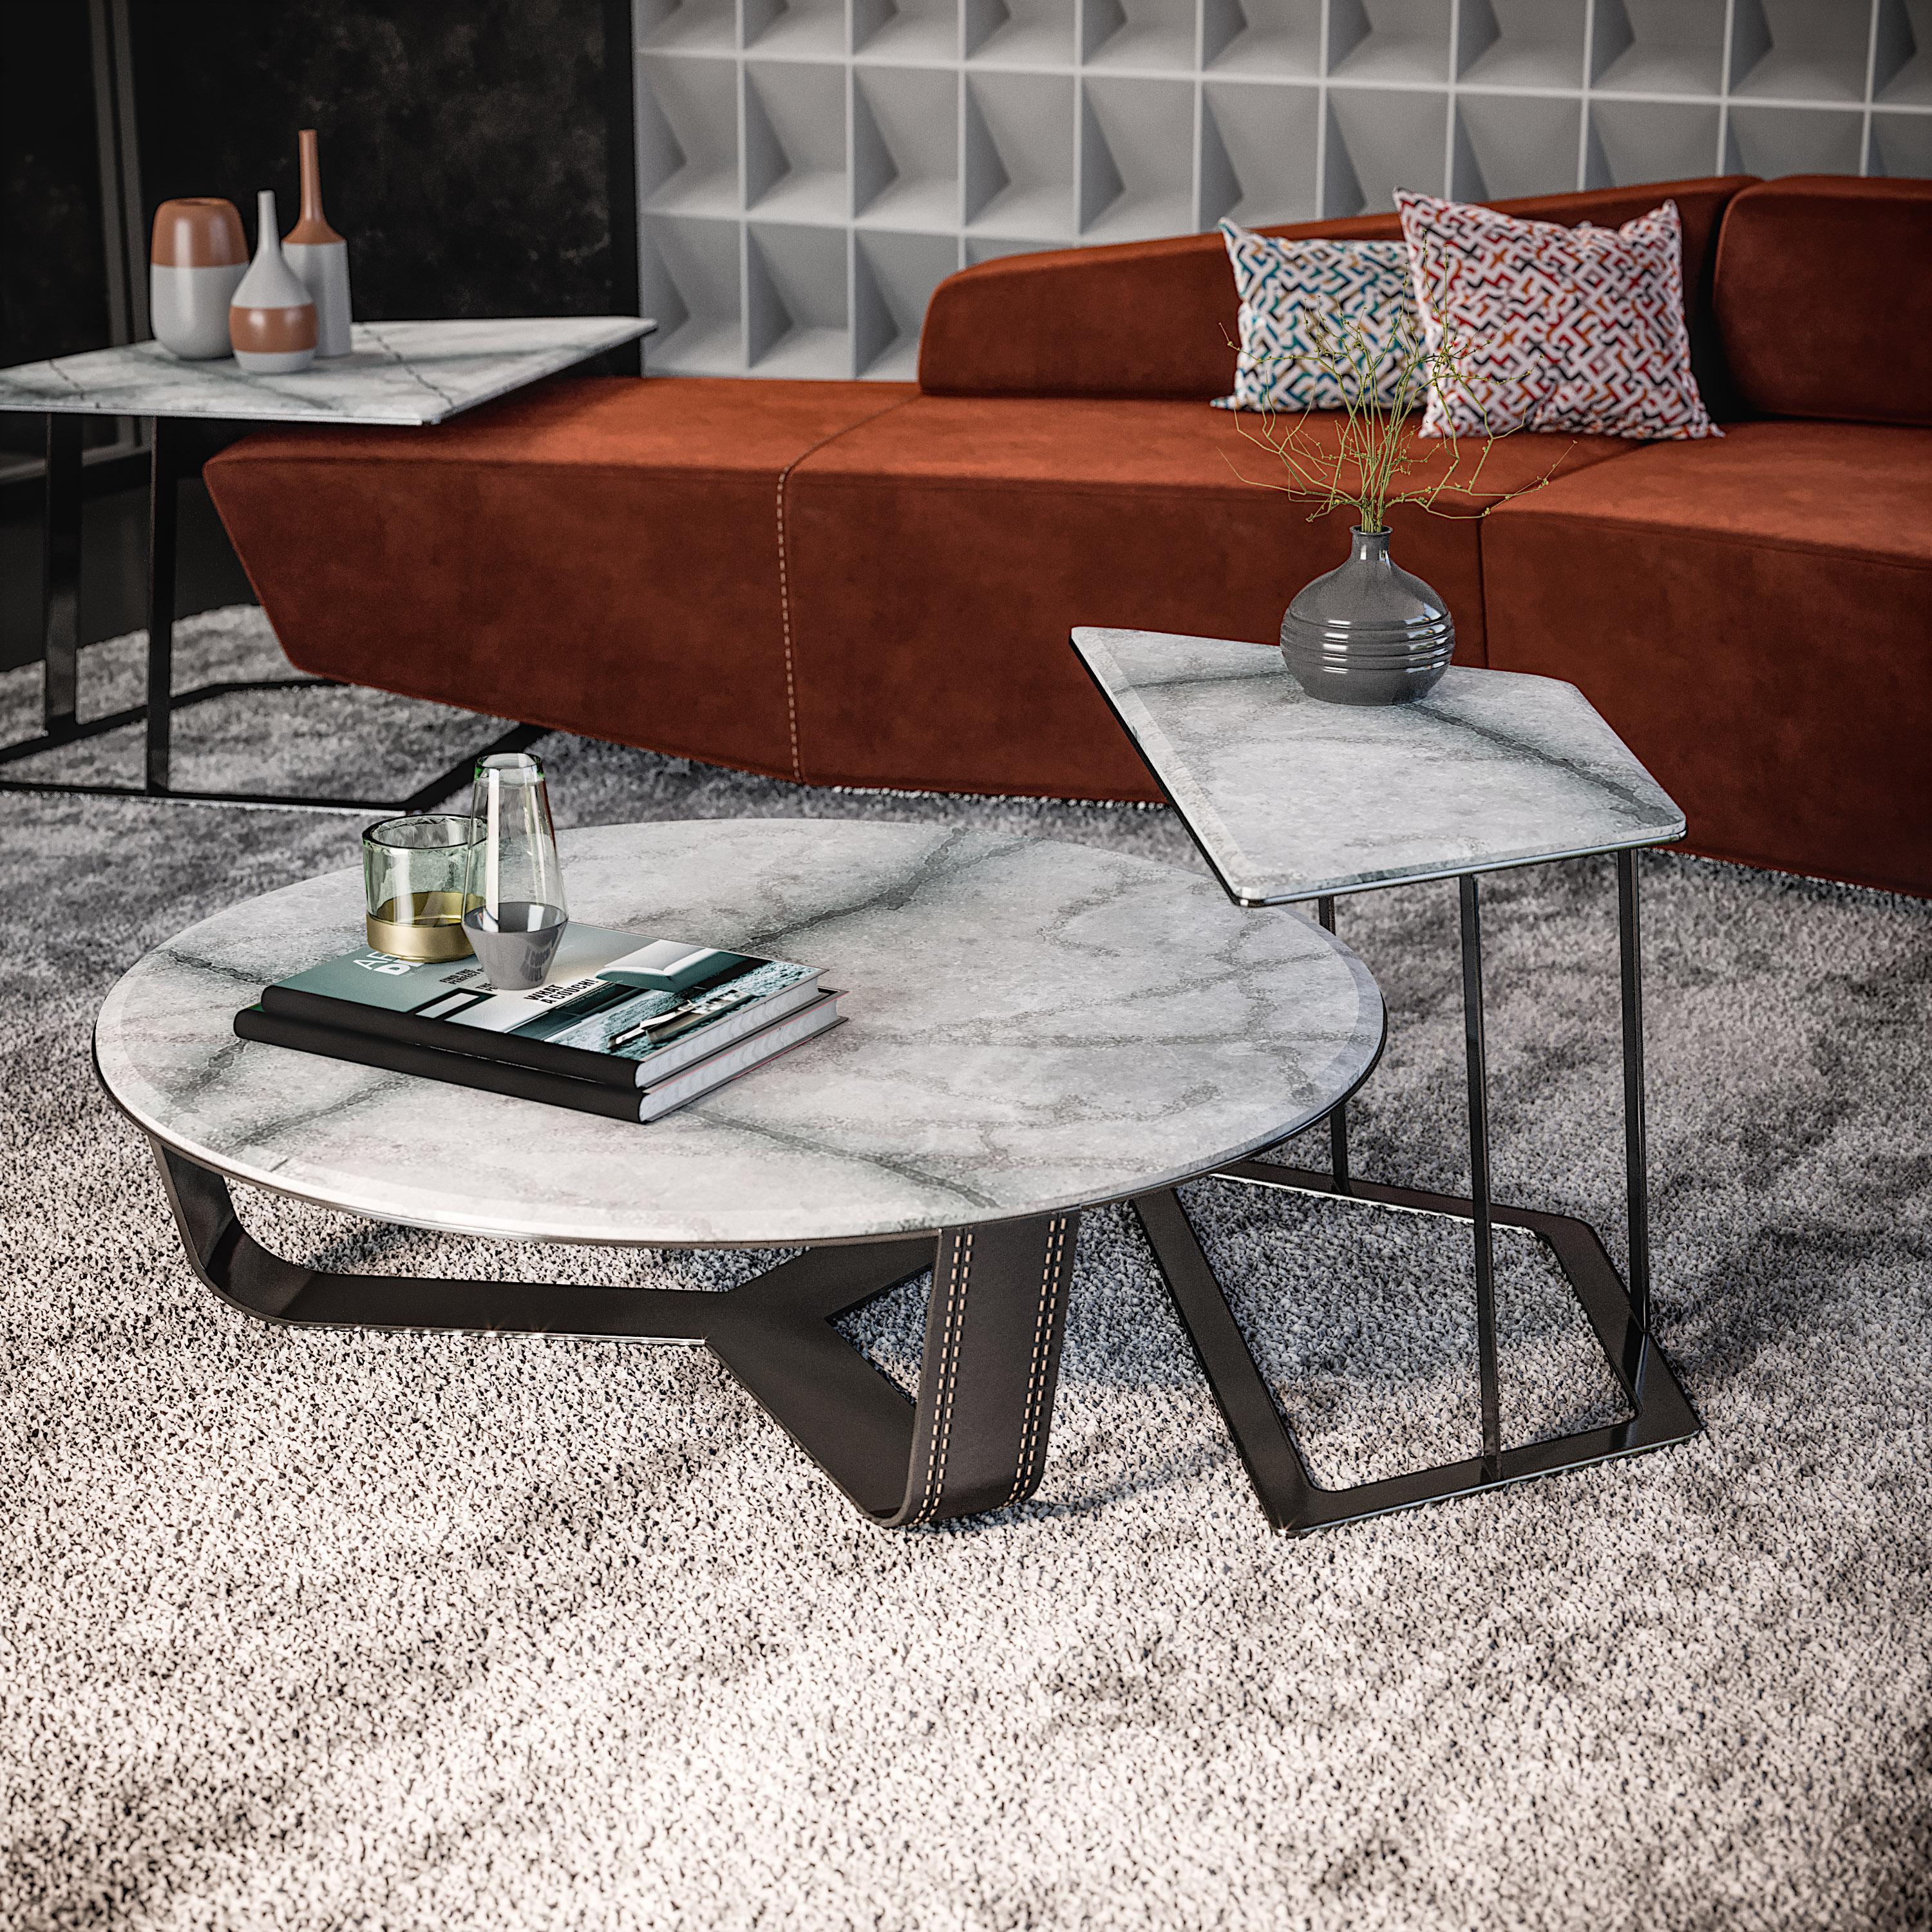 Arturo sideward coffee table trapezoid has a metal frame with nickel-metal finishing and a top in marble (you can choose among many kind of marble)
 
Arturo is part of the 